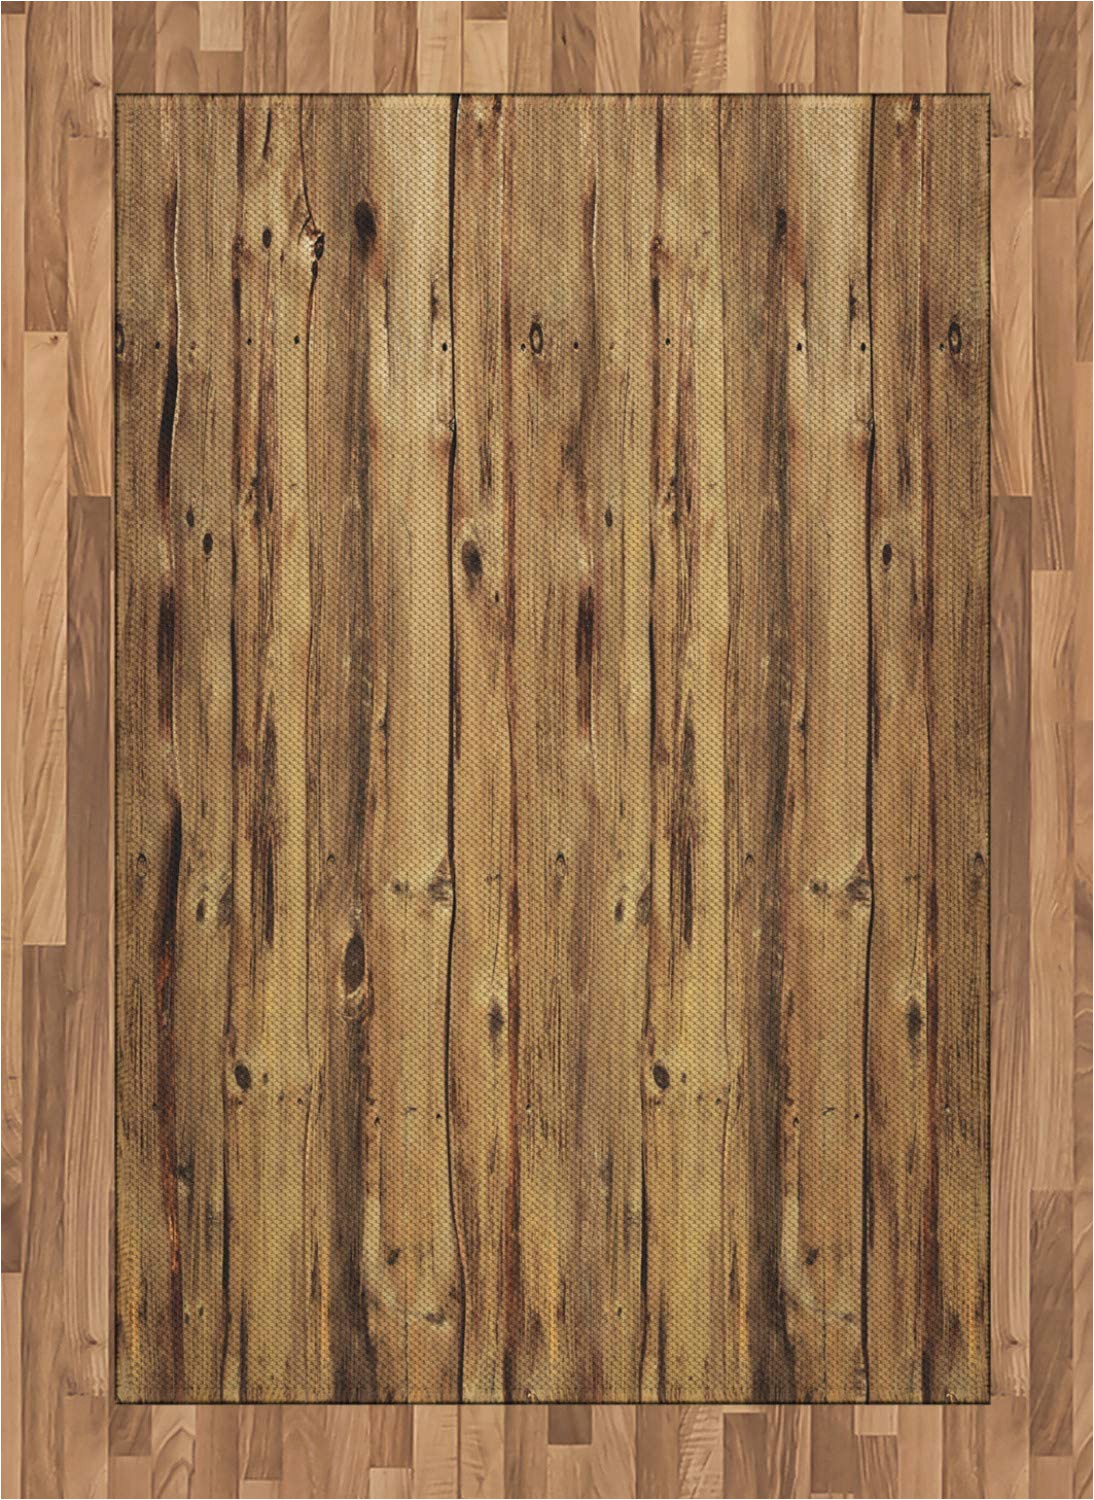 Rustic area Rugs for Dining Room Amazon Ambesonne Rustic area Rug Wooden Texture Image